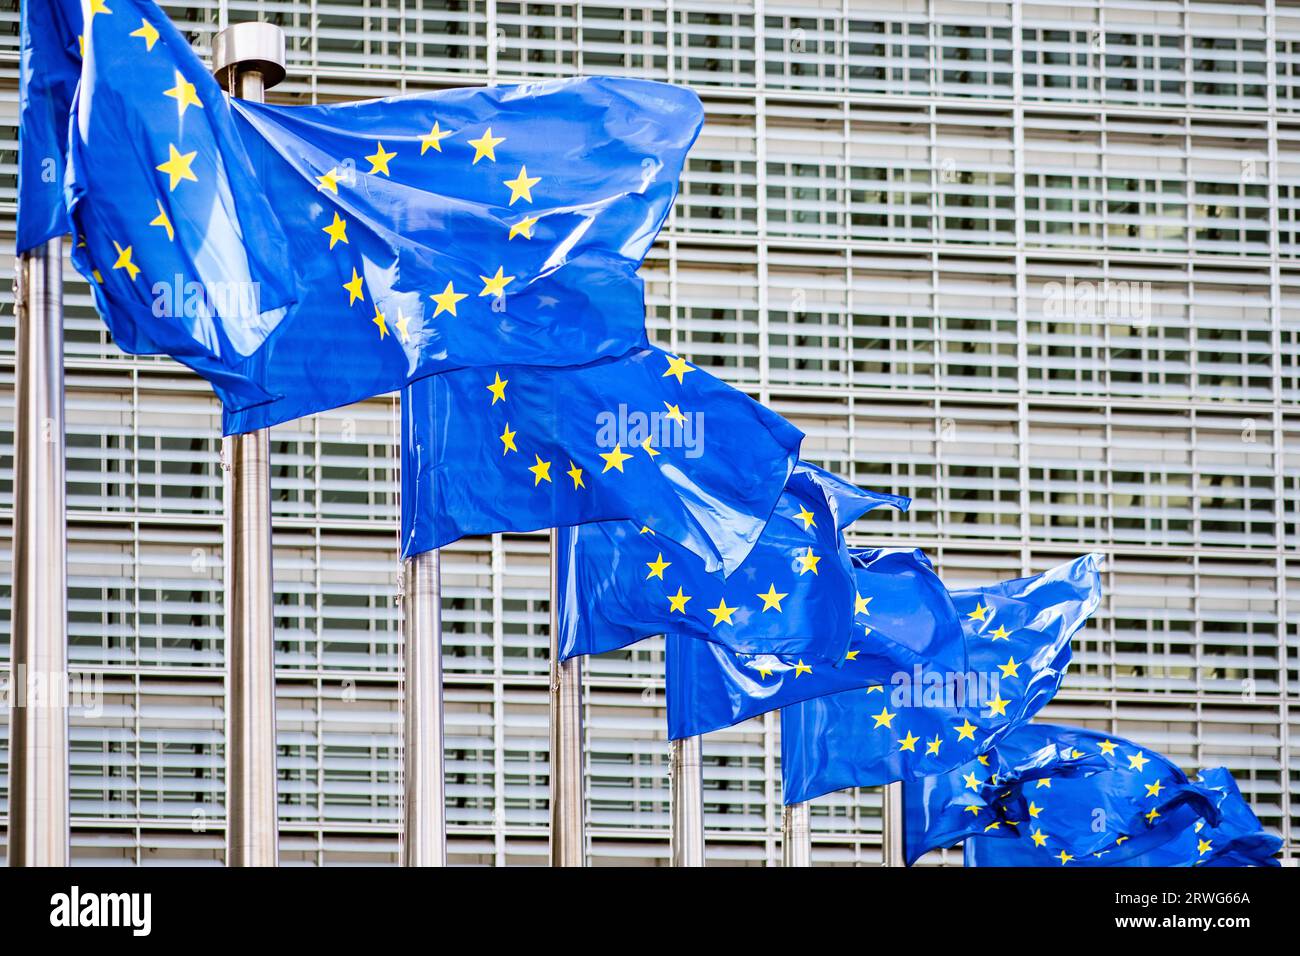 FILED - 26 May 2019, Belgium, Brüssel: Numerous European flags flutter in the wind in front of the Berlaymont building, the headquarters of the European Commission. Germany and France are jointly promoting EU reforms that are to form the basis for admitting accession candidates such as Ukraine. Photo: Marcel Kusch/dpa Stock Photo